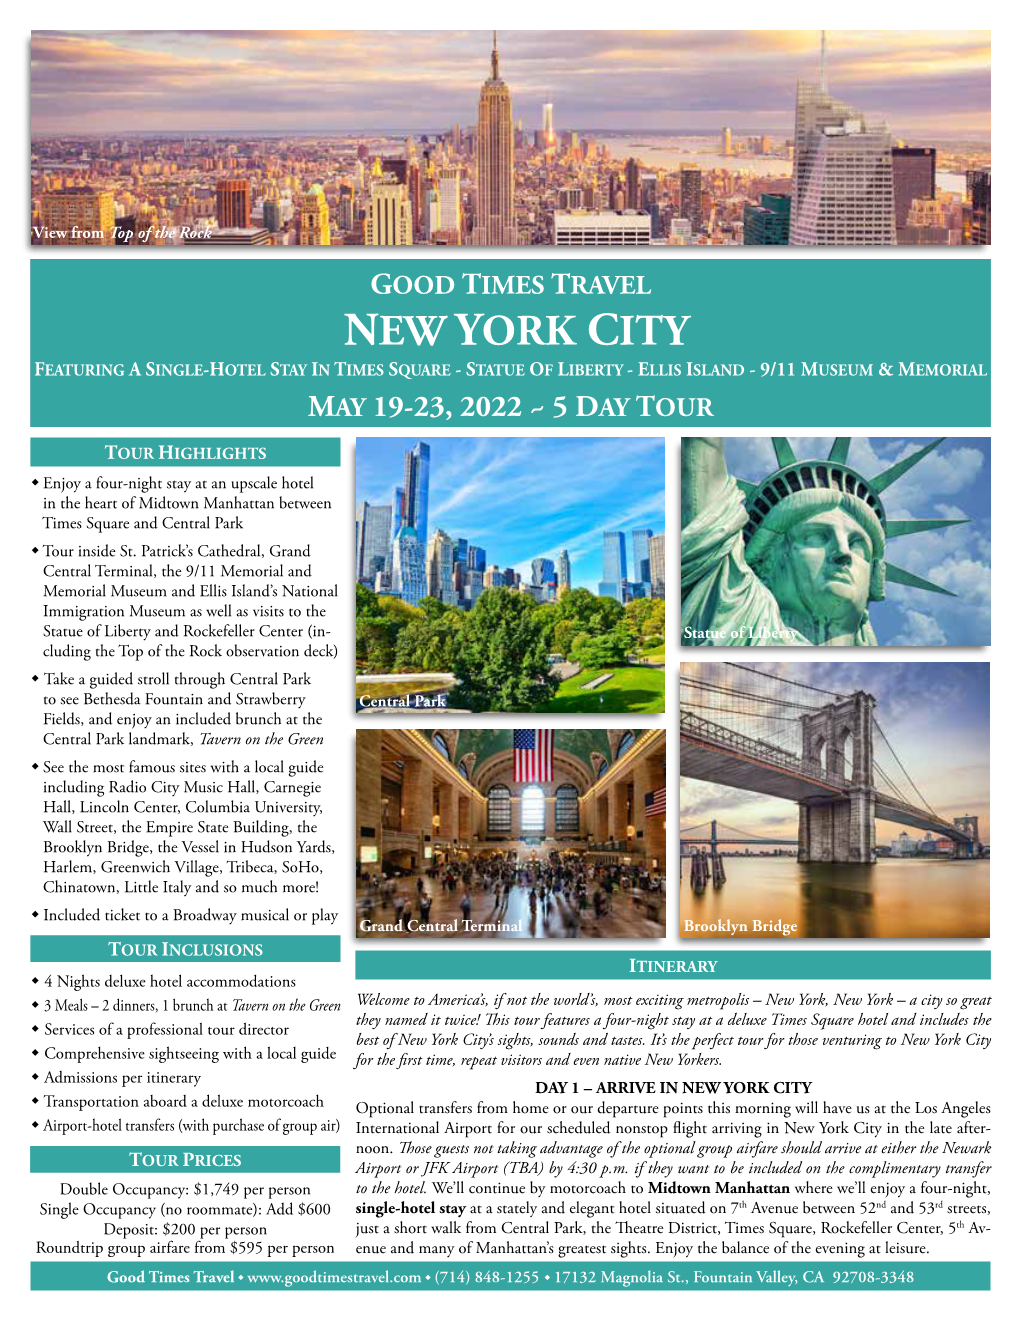 New York City Featuring a Single-Hotel Stay in Times Square - Statue of Liberty - Ellis Island - 9/11 Museum & Memorial May 19-23, 2022 ~ 5 Day Tour